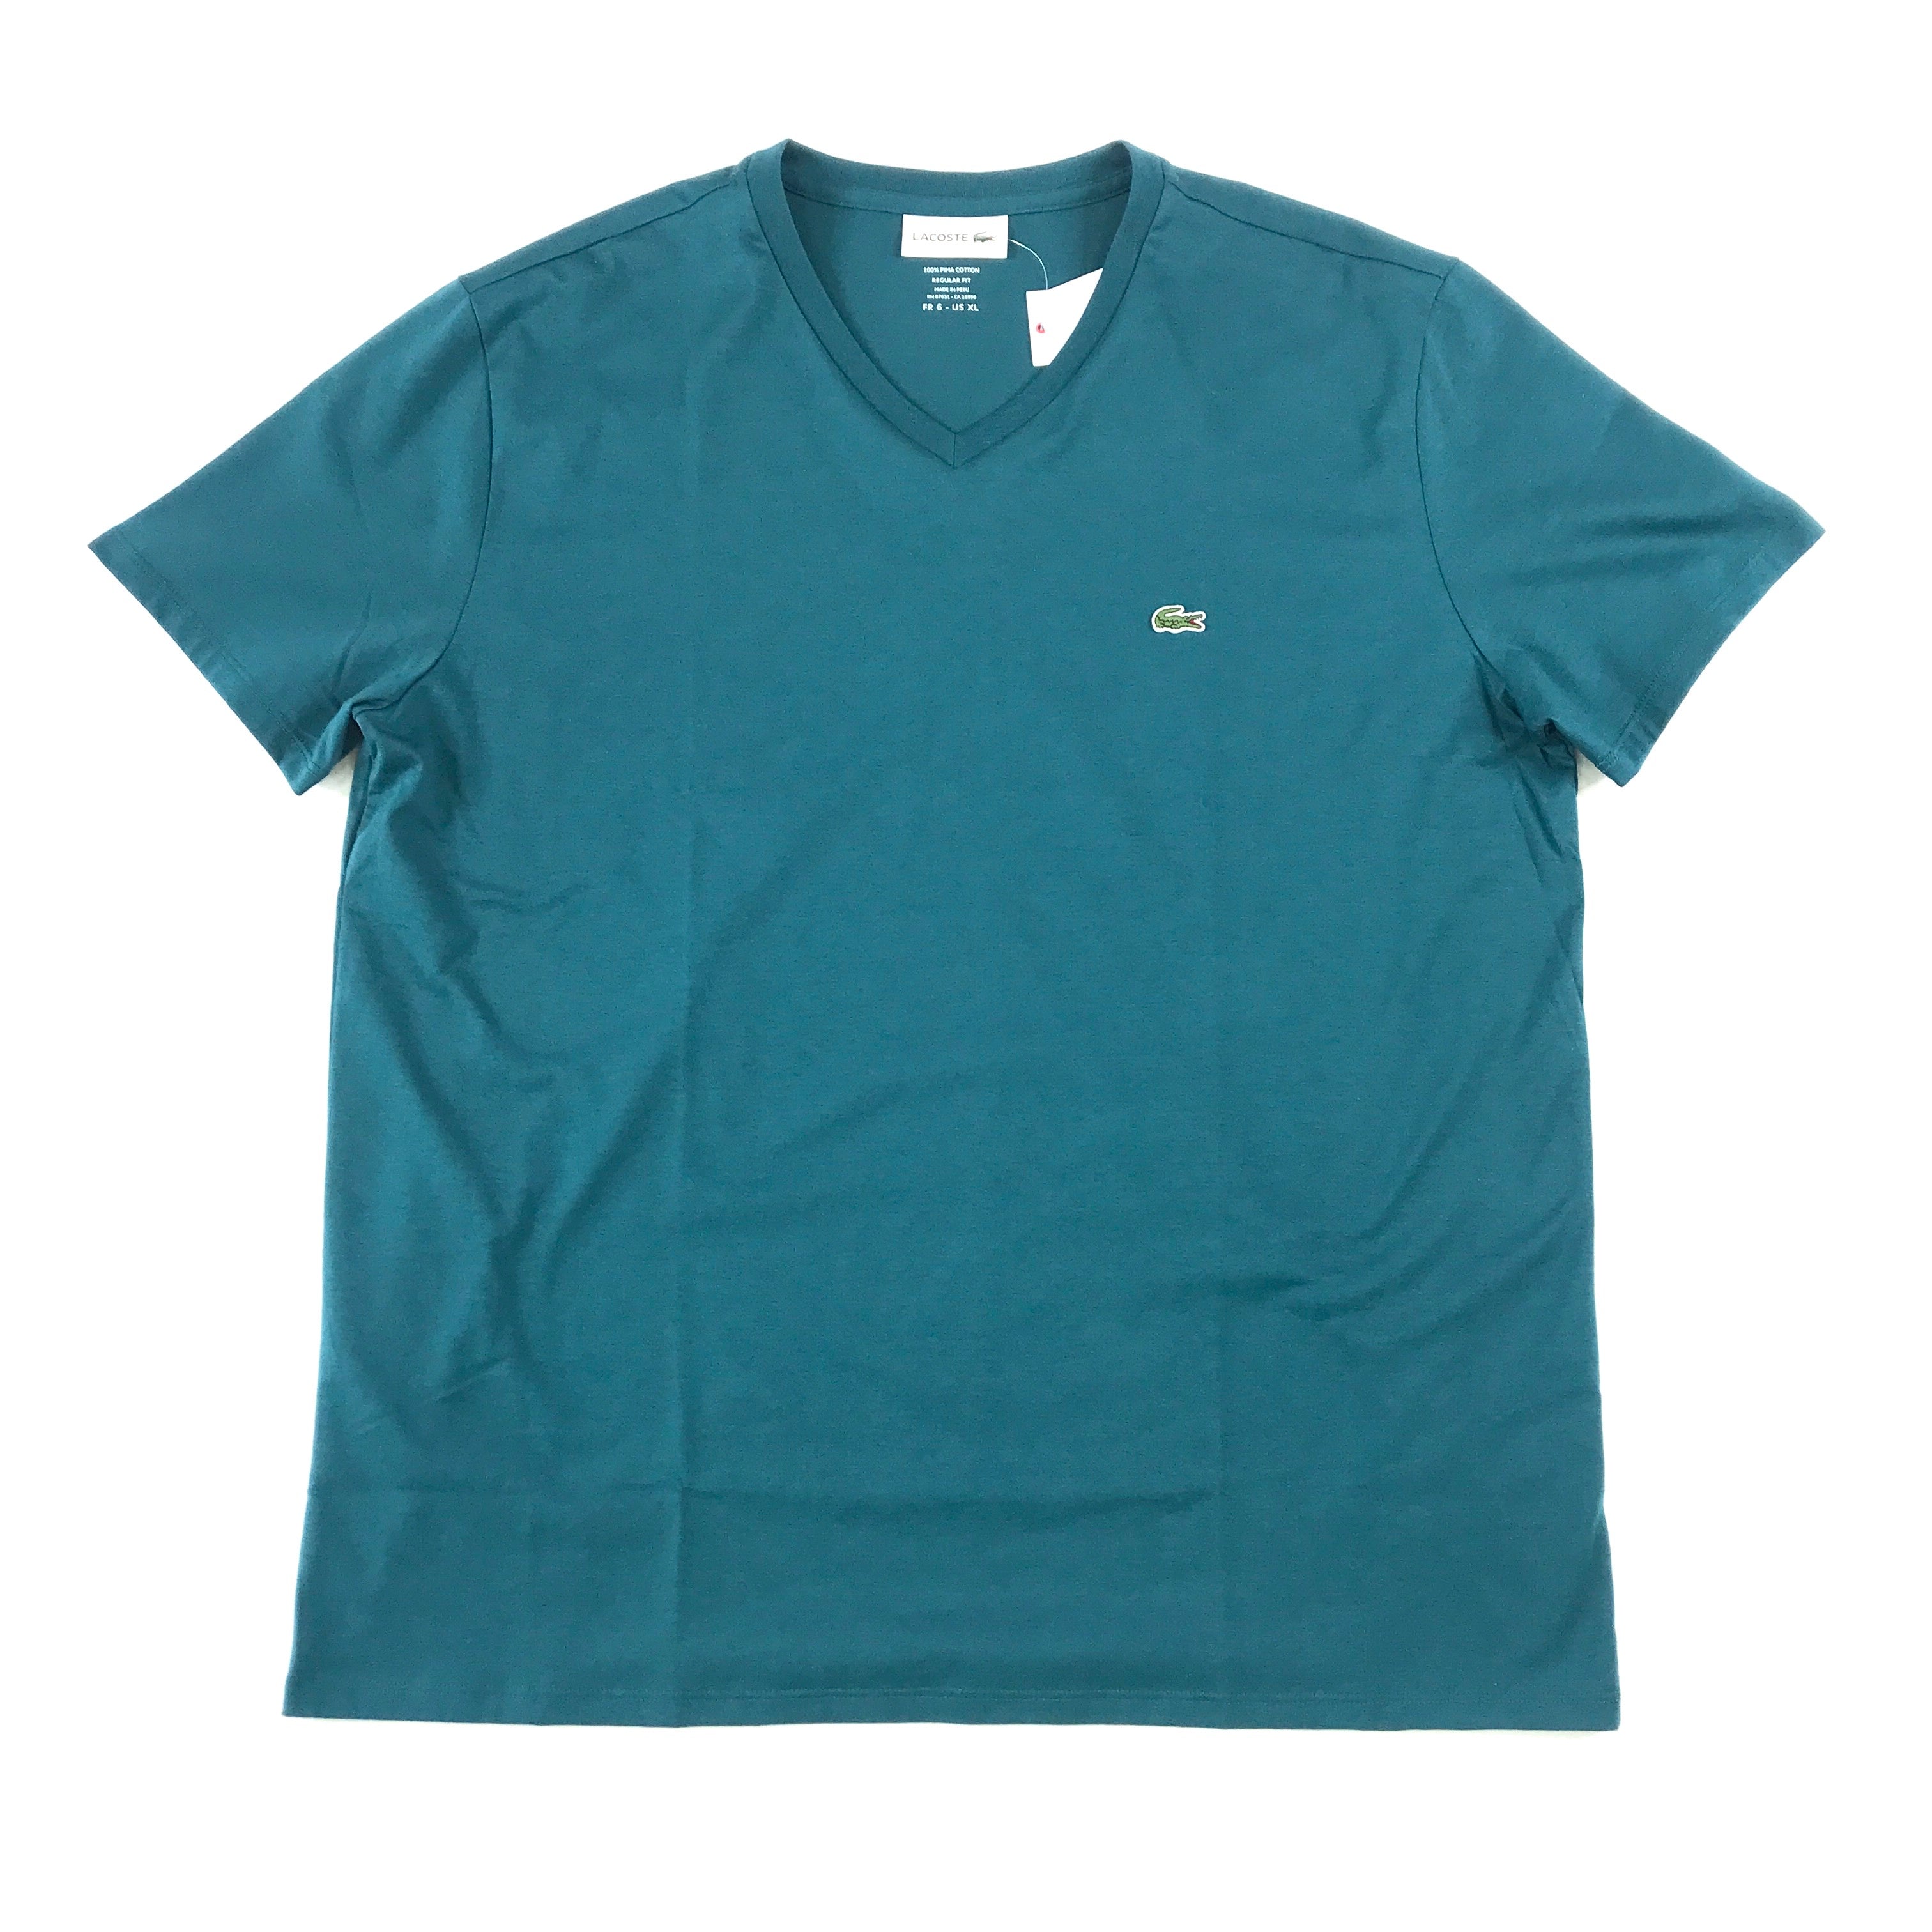 Lacoste cotton v-neck in teal